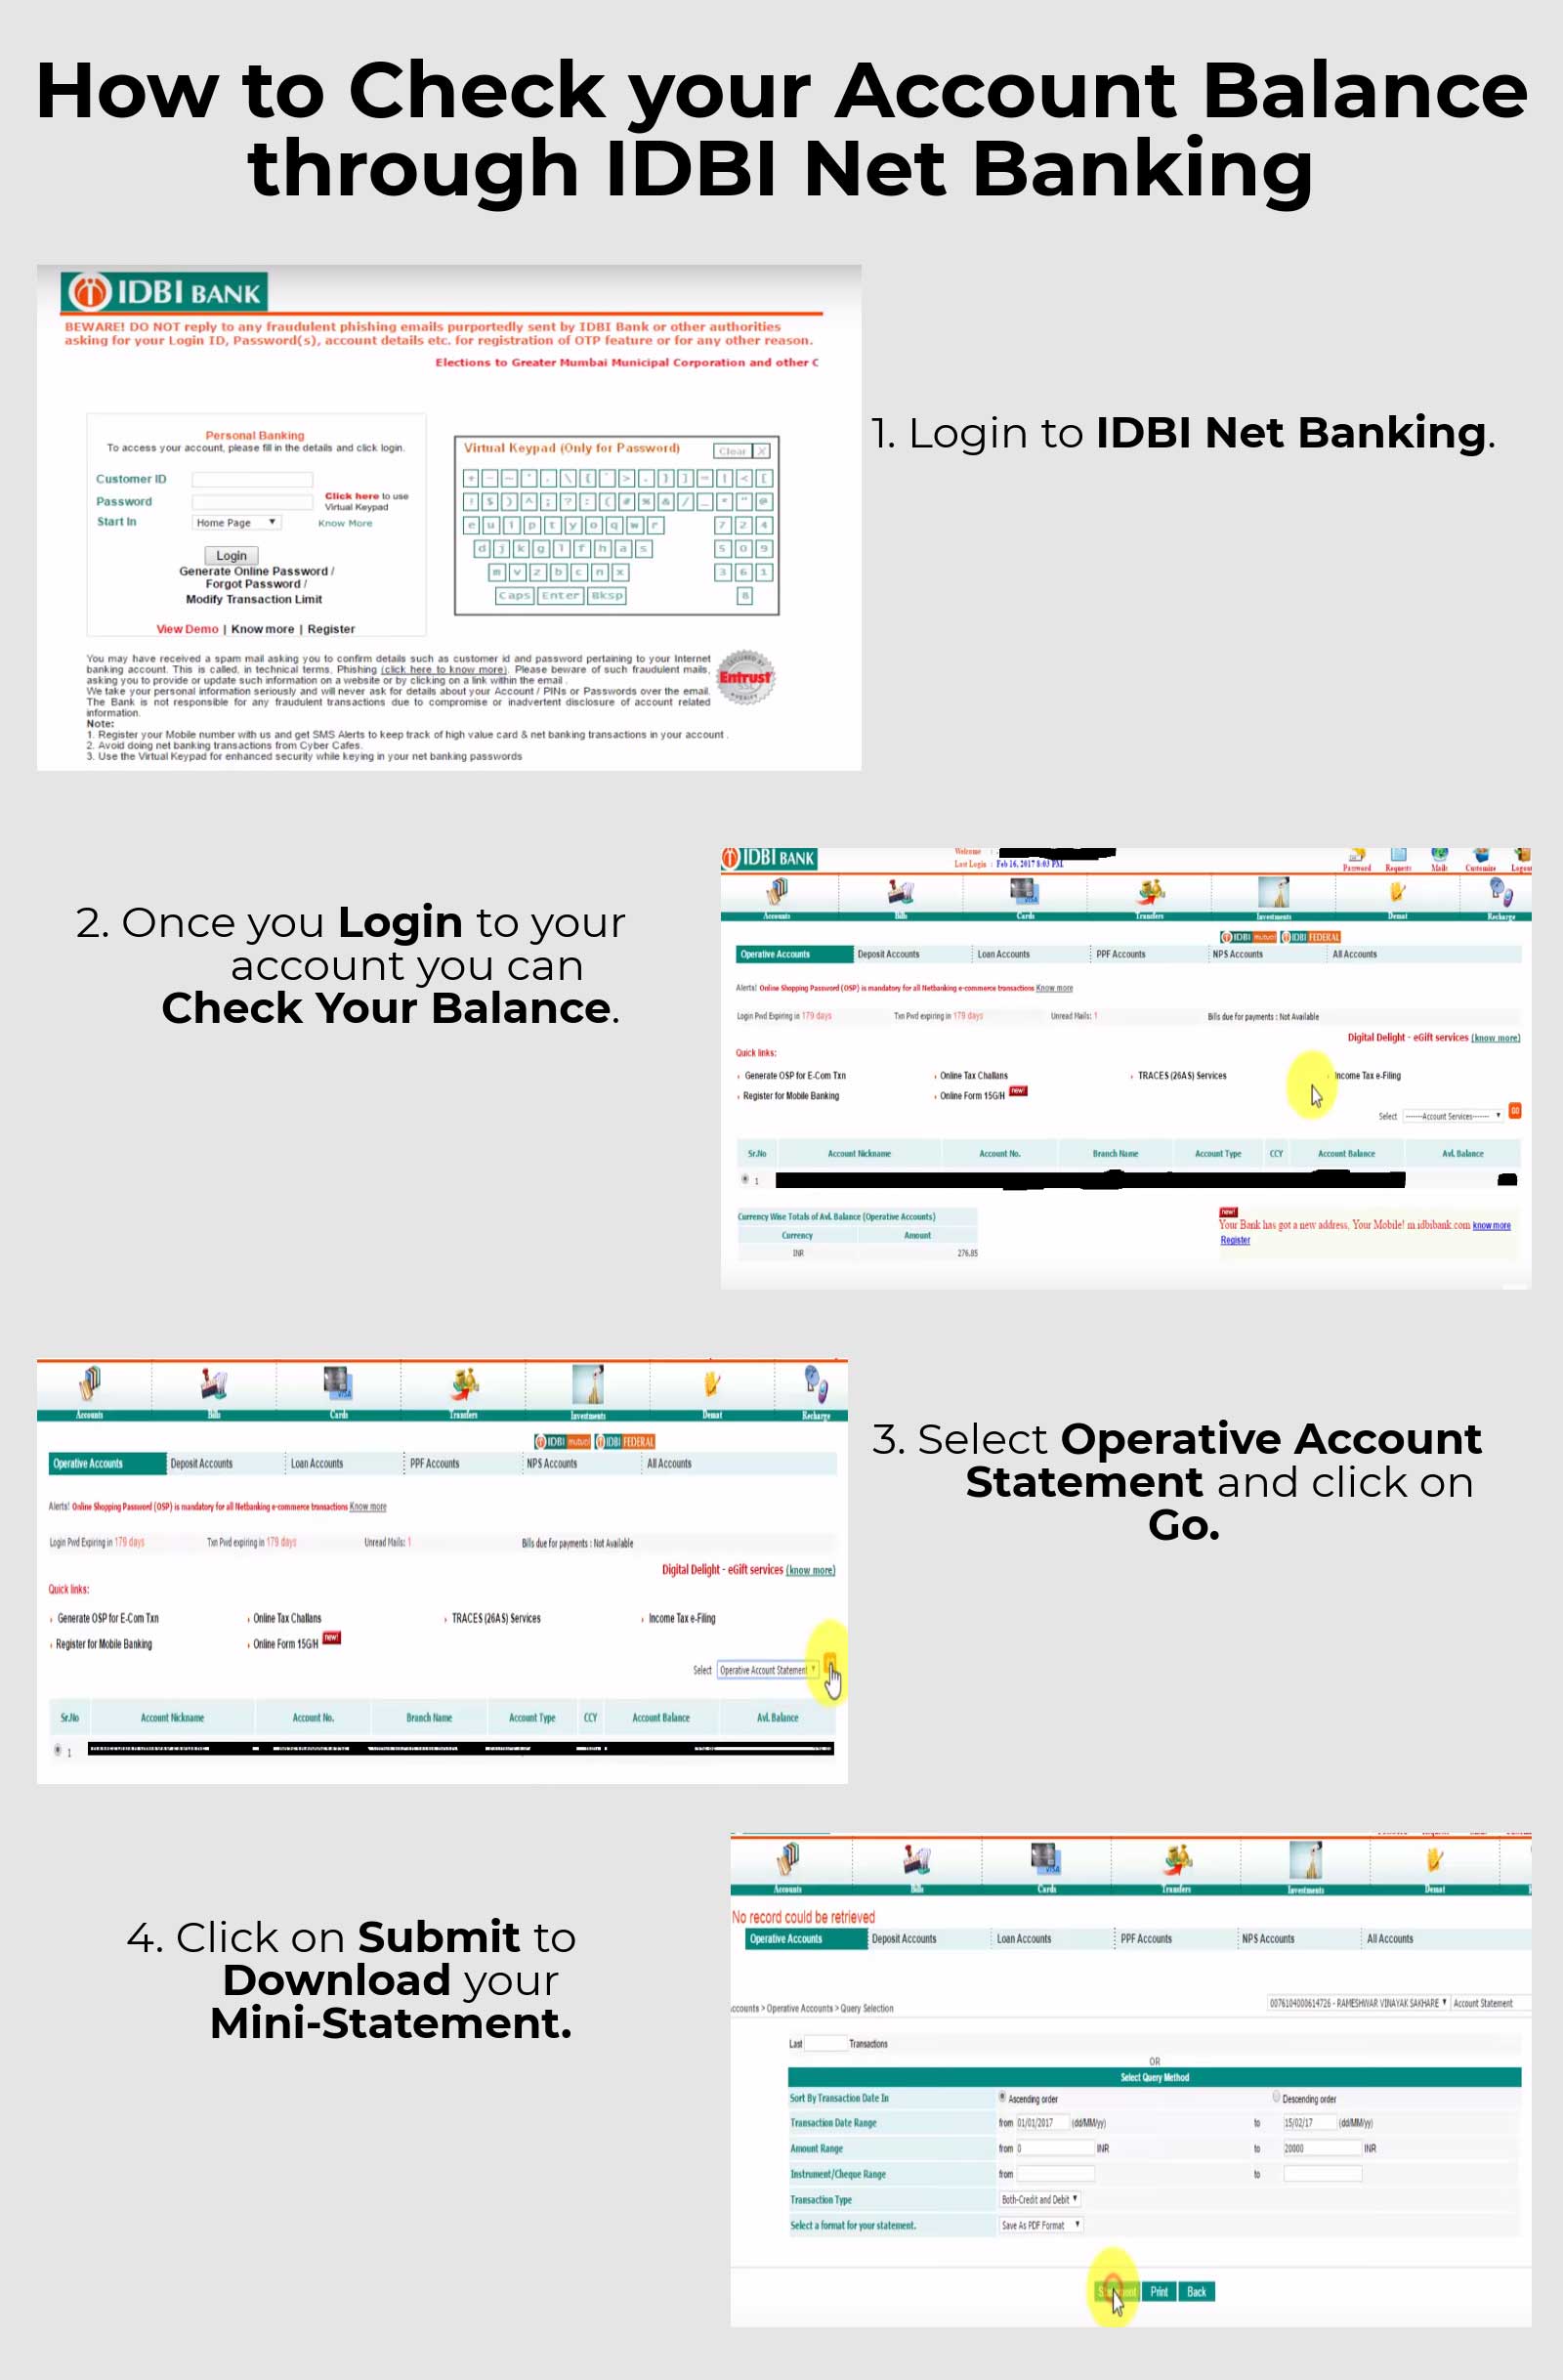 
                       1.   Login to IDBI Net Banking.
2.  Once you Login to your account you can check your balance.
3.  Select Operative Account Statement and click on go.
4.  Click on Submit to download your Mini-Statement.
                        